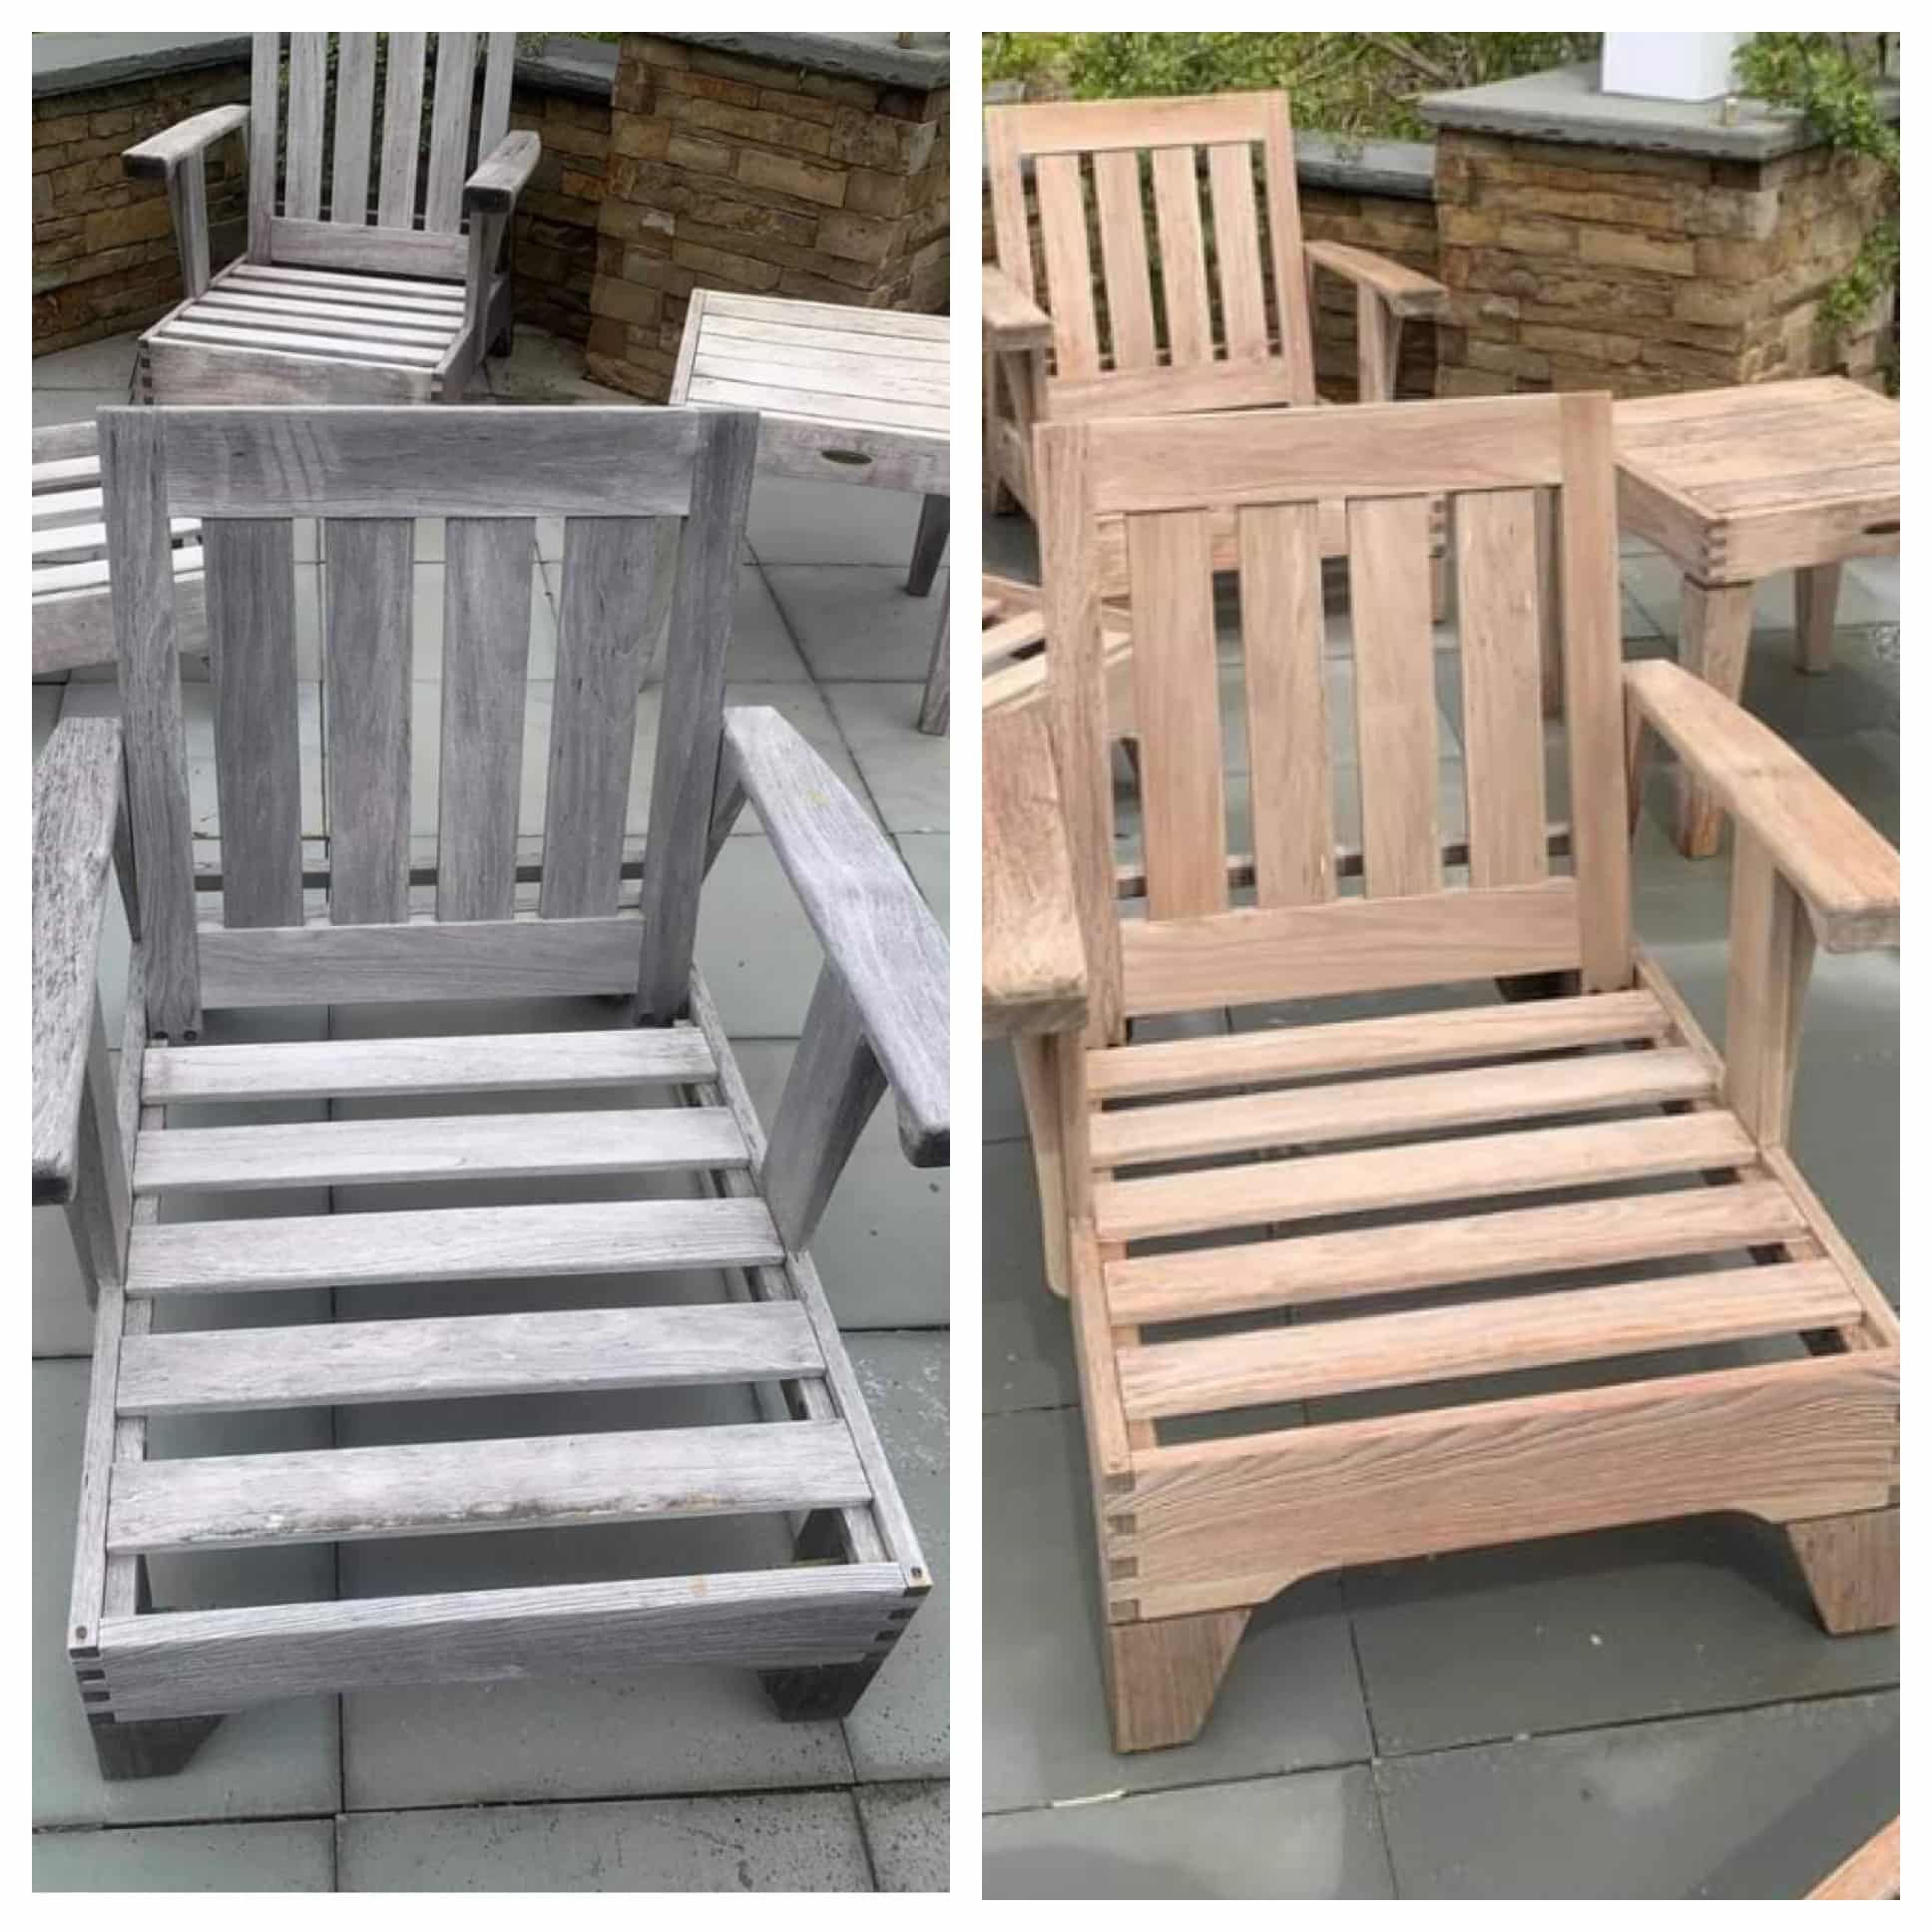 Power washing before and after of wooden chairs at the Jersey shore